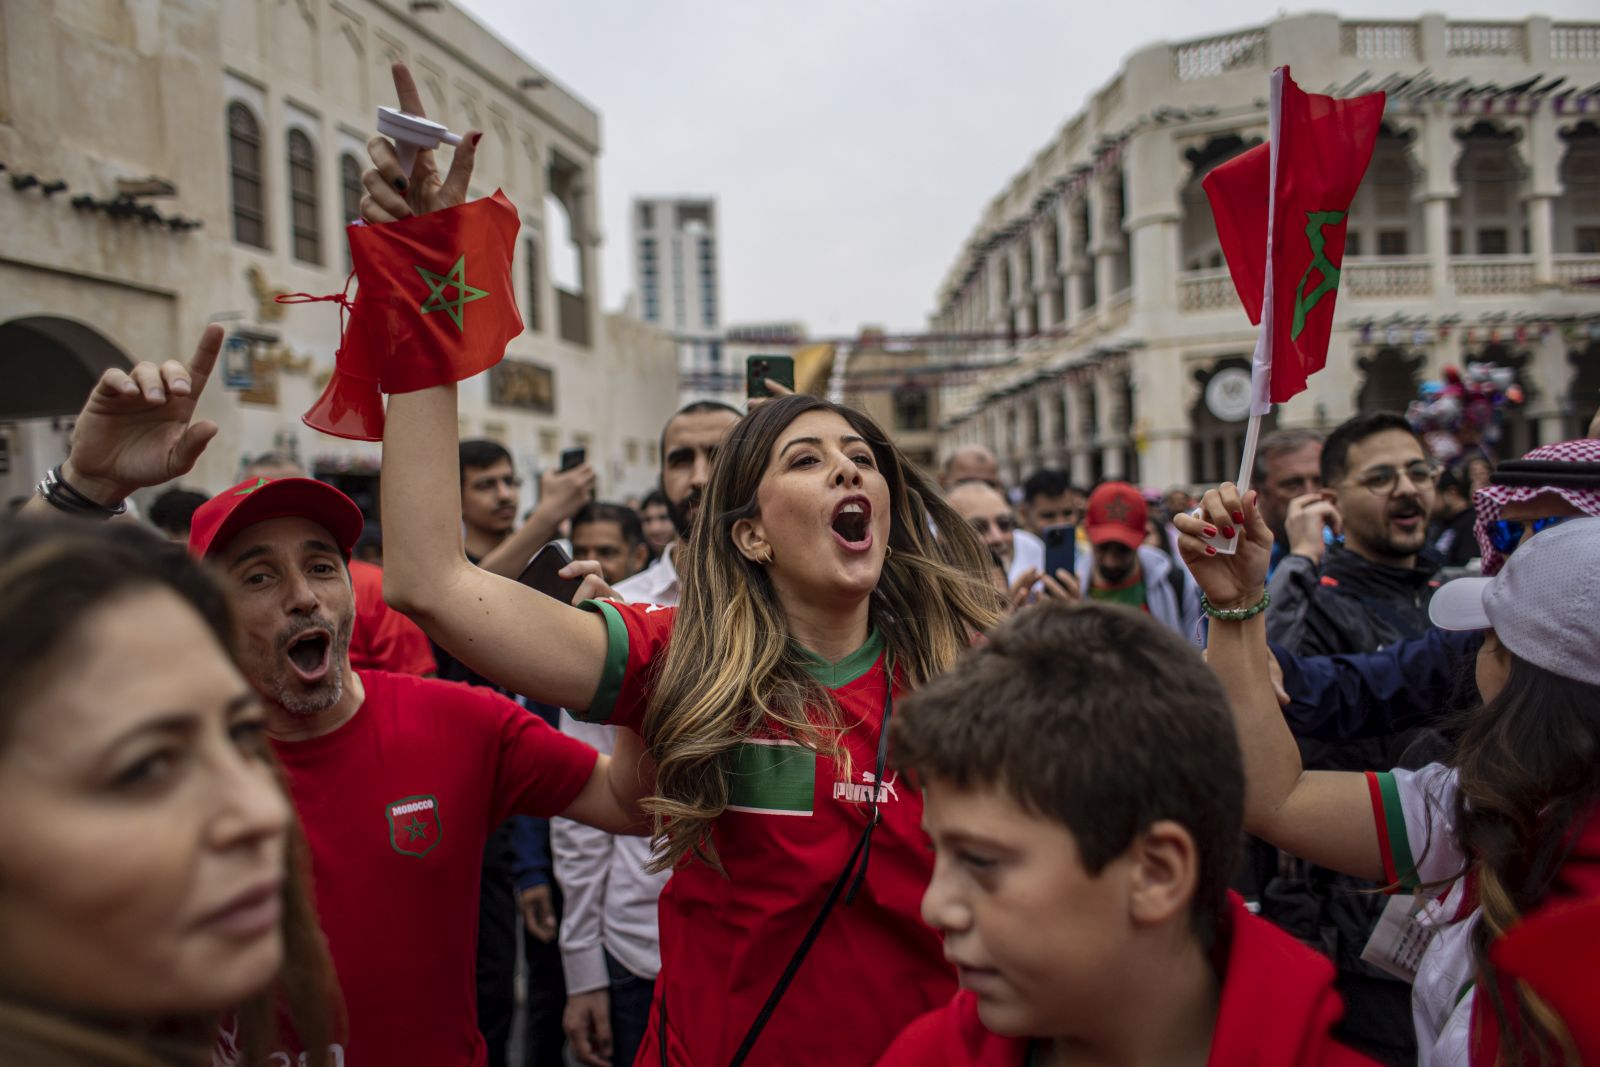 epa10358817 Fans of Morocco cheer at the Souq Waqif market during FIFA World Cup 2022 in Doha, Qatar, 10 December 2022. Morocco will face Portugal in their FIFA World Cup 2022 quarter final soccer match on 10 December 2022.  EPA/MARTIN DIVISEK